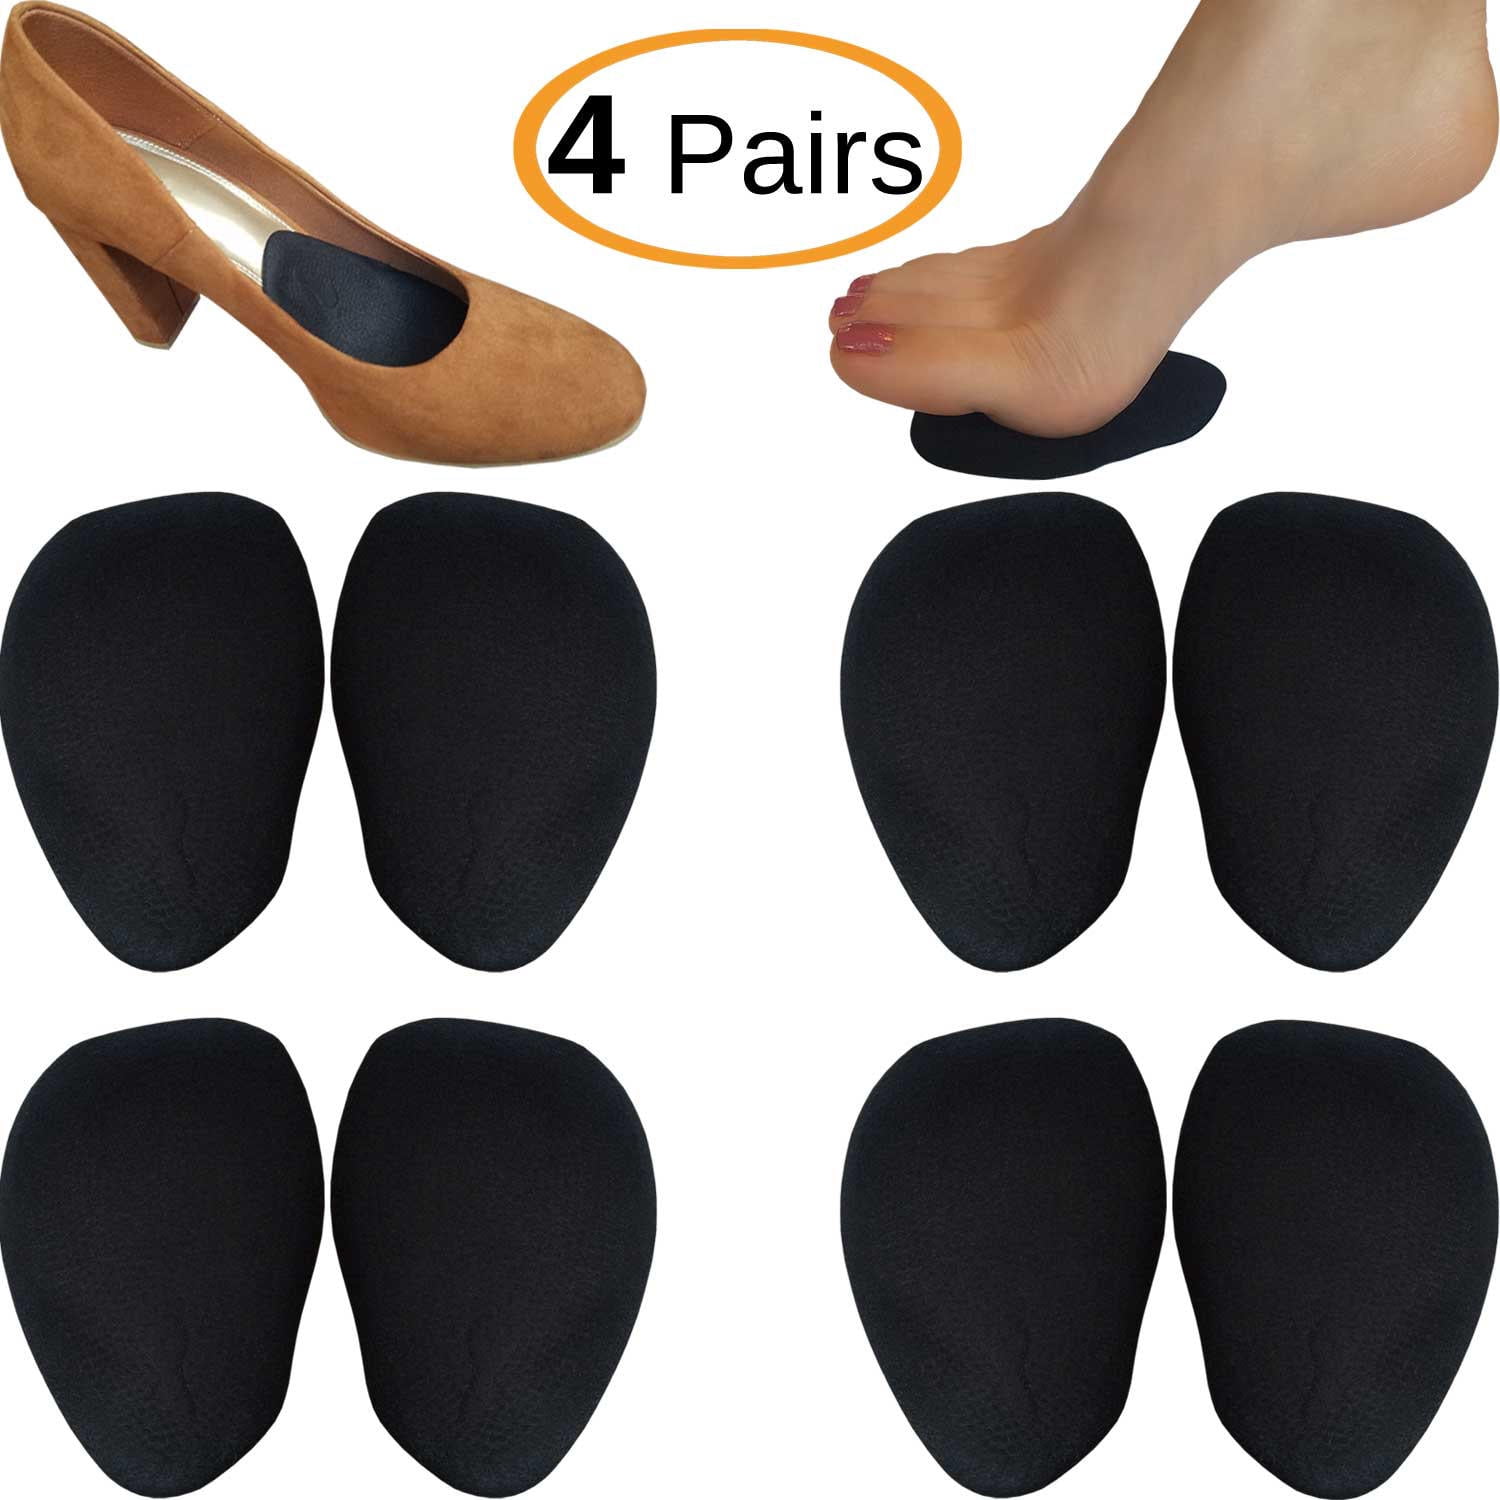 High Heel Shoe-Pad Forefoot Insole Cushion Non-Slip Insoles Foot Care New 